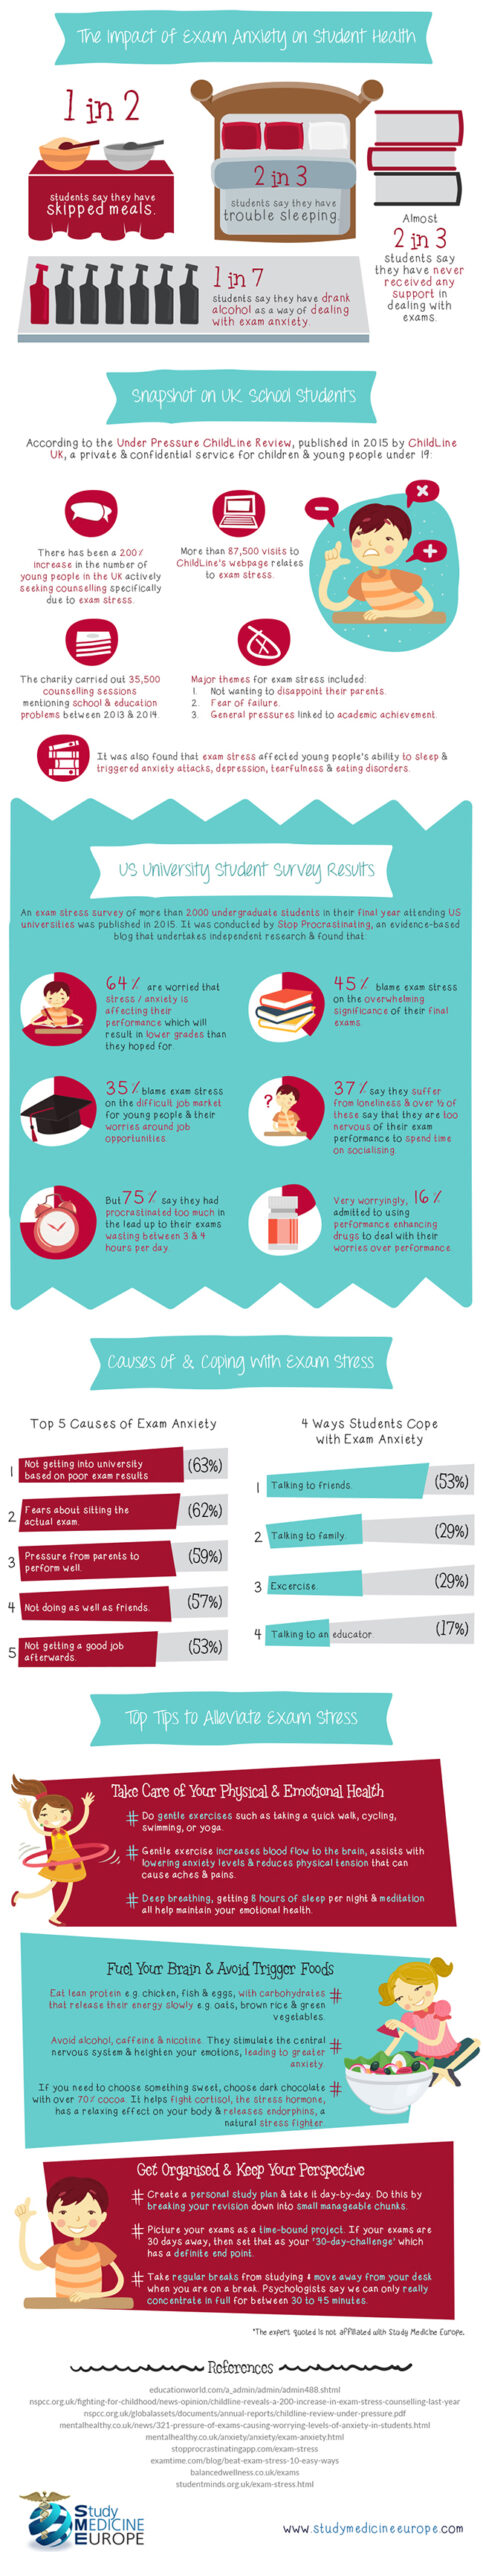 Graphic on exam stress, its impact and tips on how to beat it